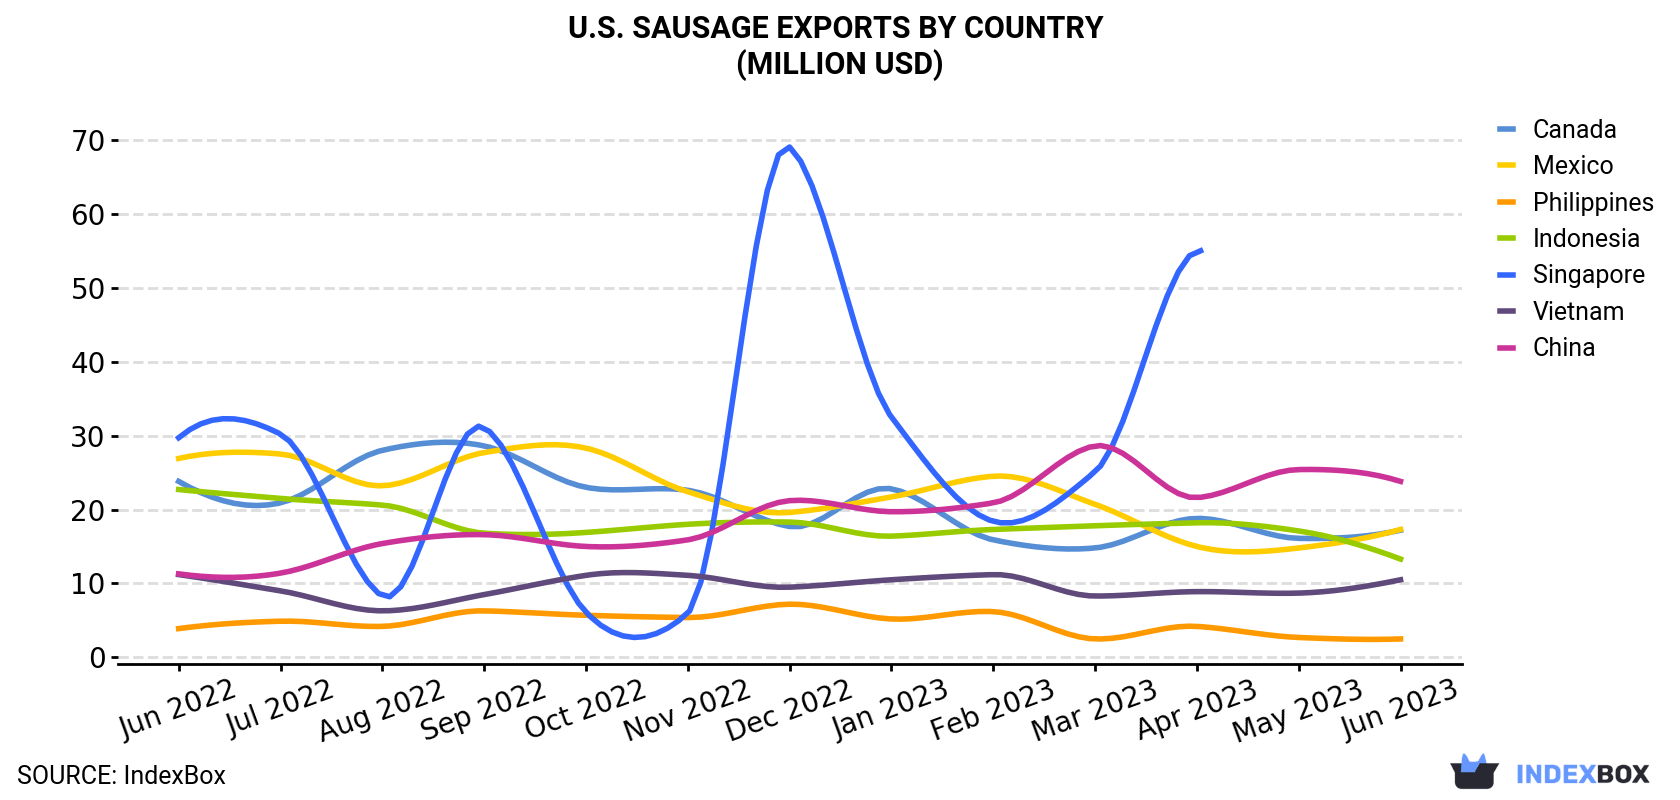 U.S. Sausage Exports By Country (Million USD)